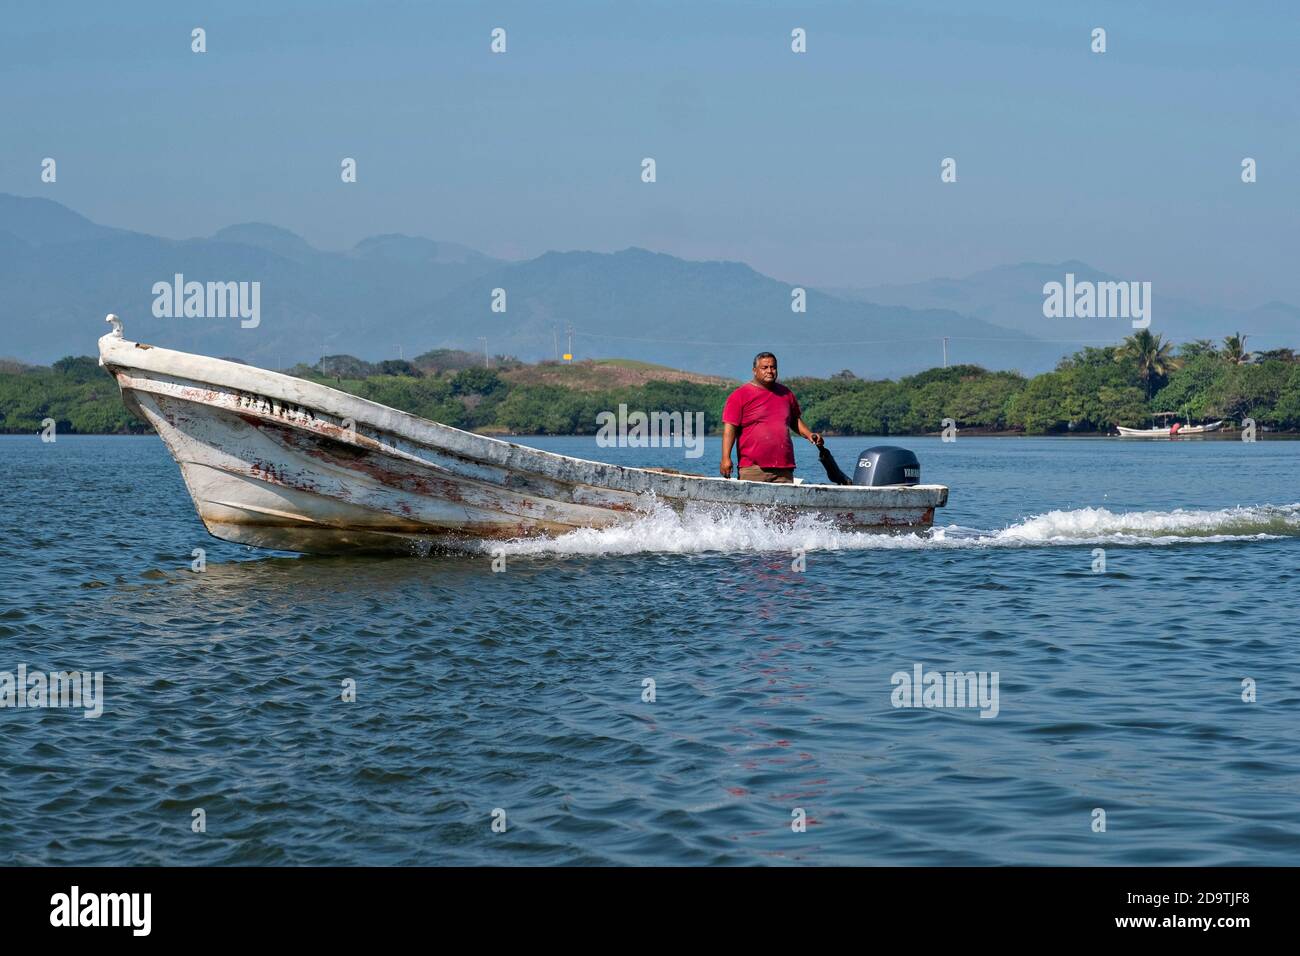 A fisherman motors his panga in Lake Catemaco, Veracruz, Mexico. The lagoon which flows into the Gulf of Mexico is one of the best preserved coastal wetlands and mangroves forests in Mexico and part of the Los Tuxtlas biosphere reserve. Stock Photo